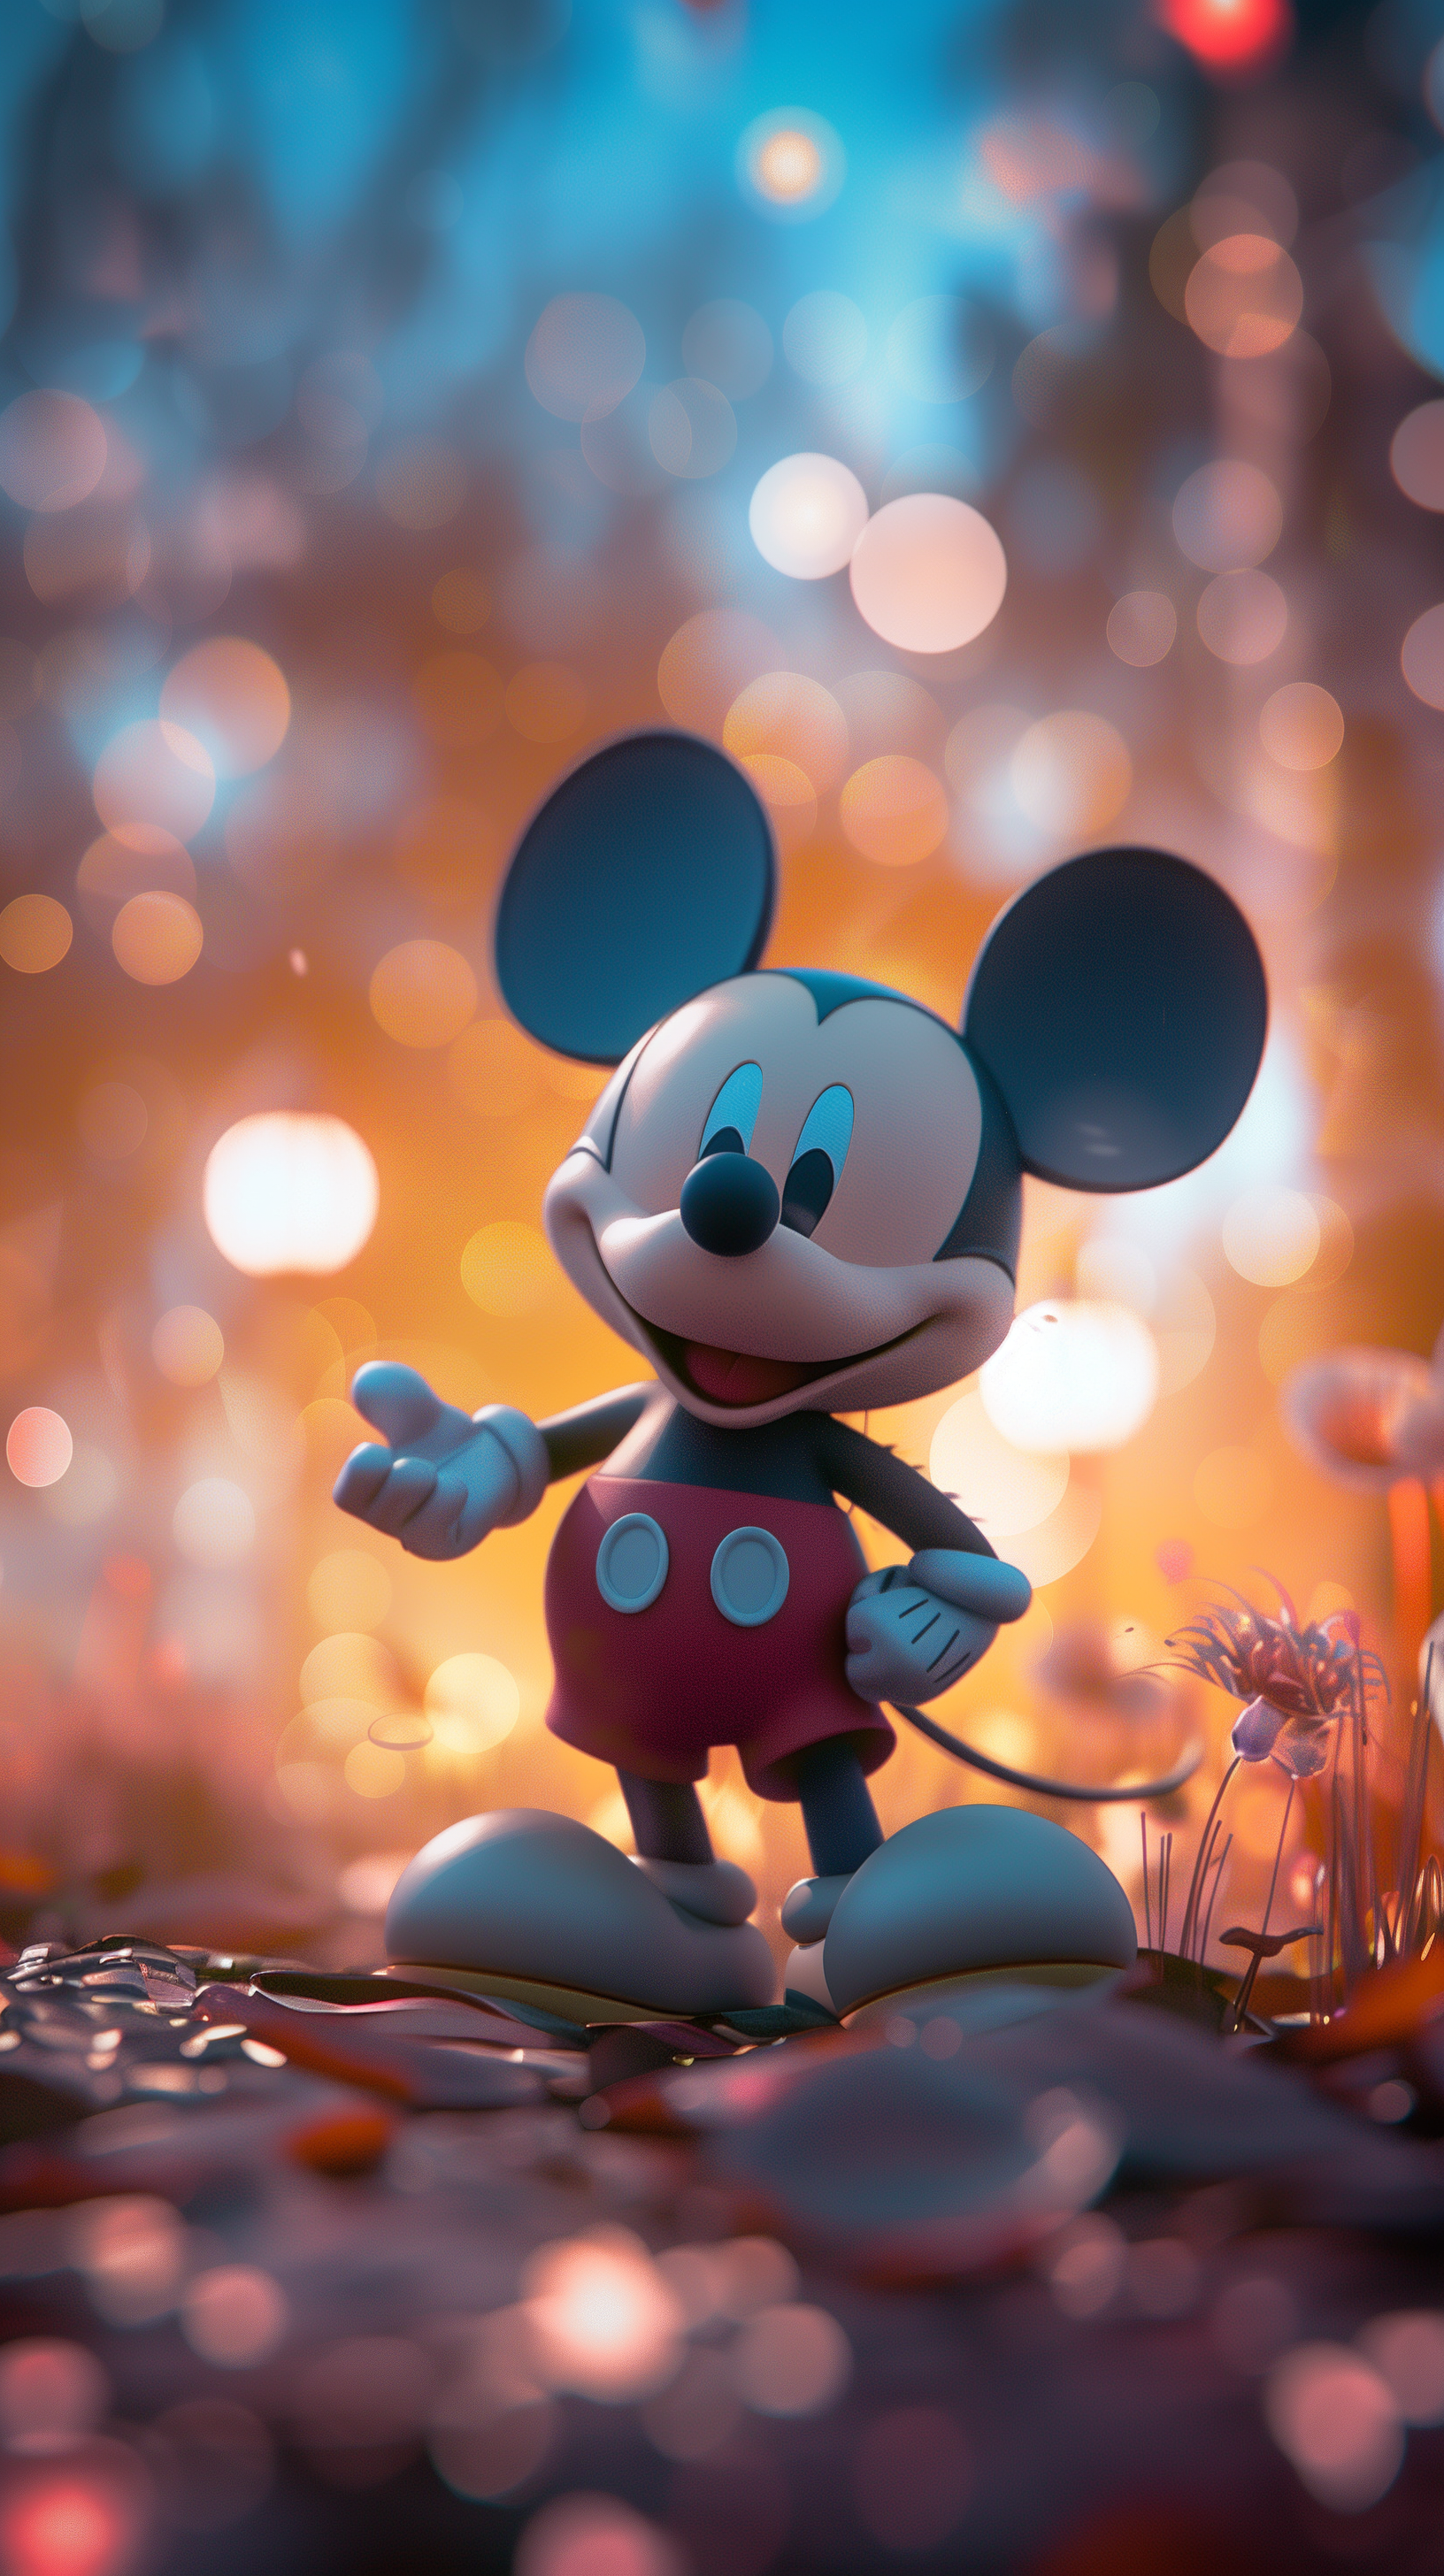 Mickey Mouse Wallpapers iPhone - Wallpaper Cave | Mickey mouse wallpaper  iphone, Mickey mouse wallpaper, Girl iphone wallpaper